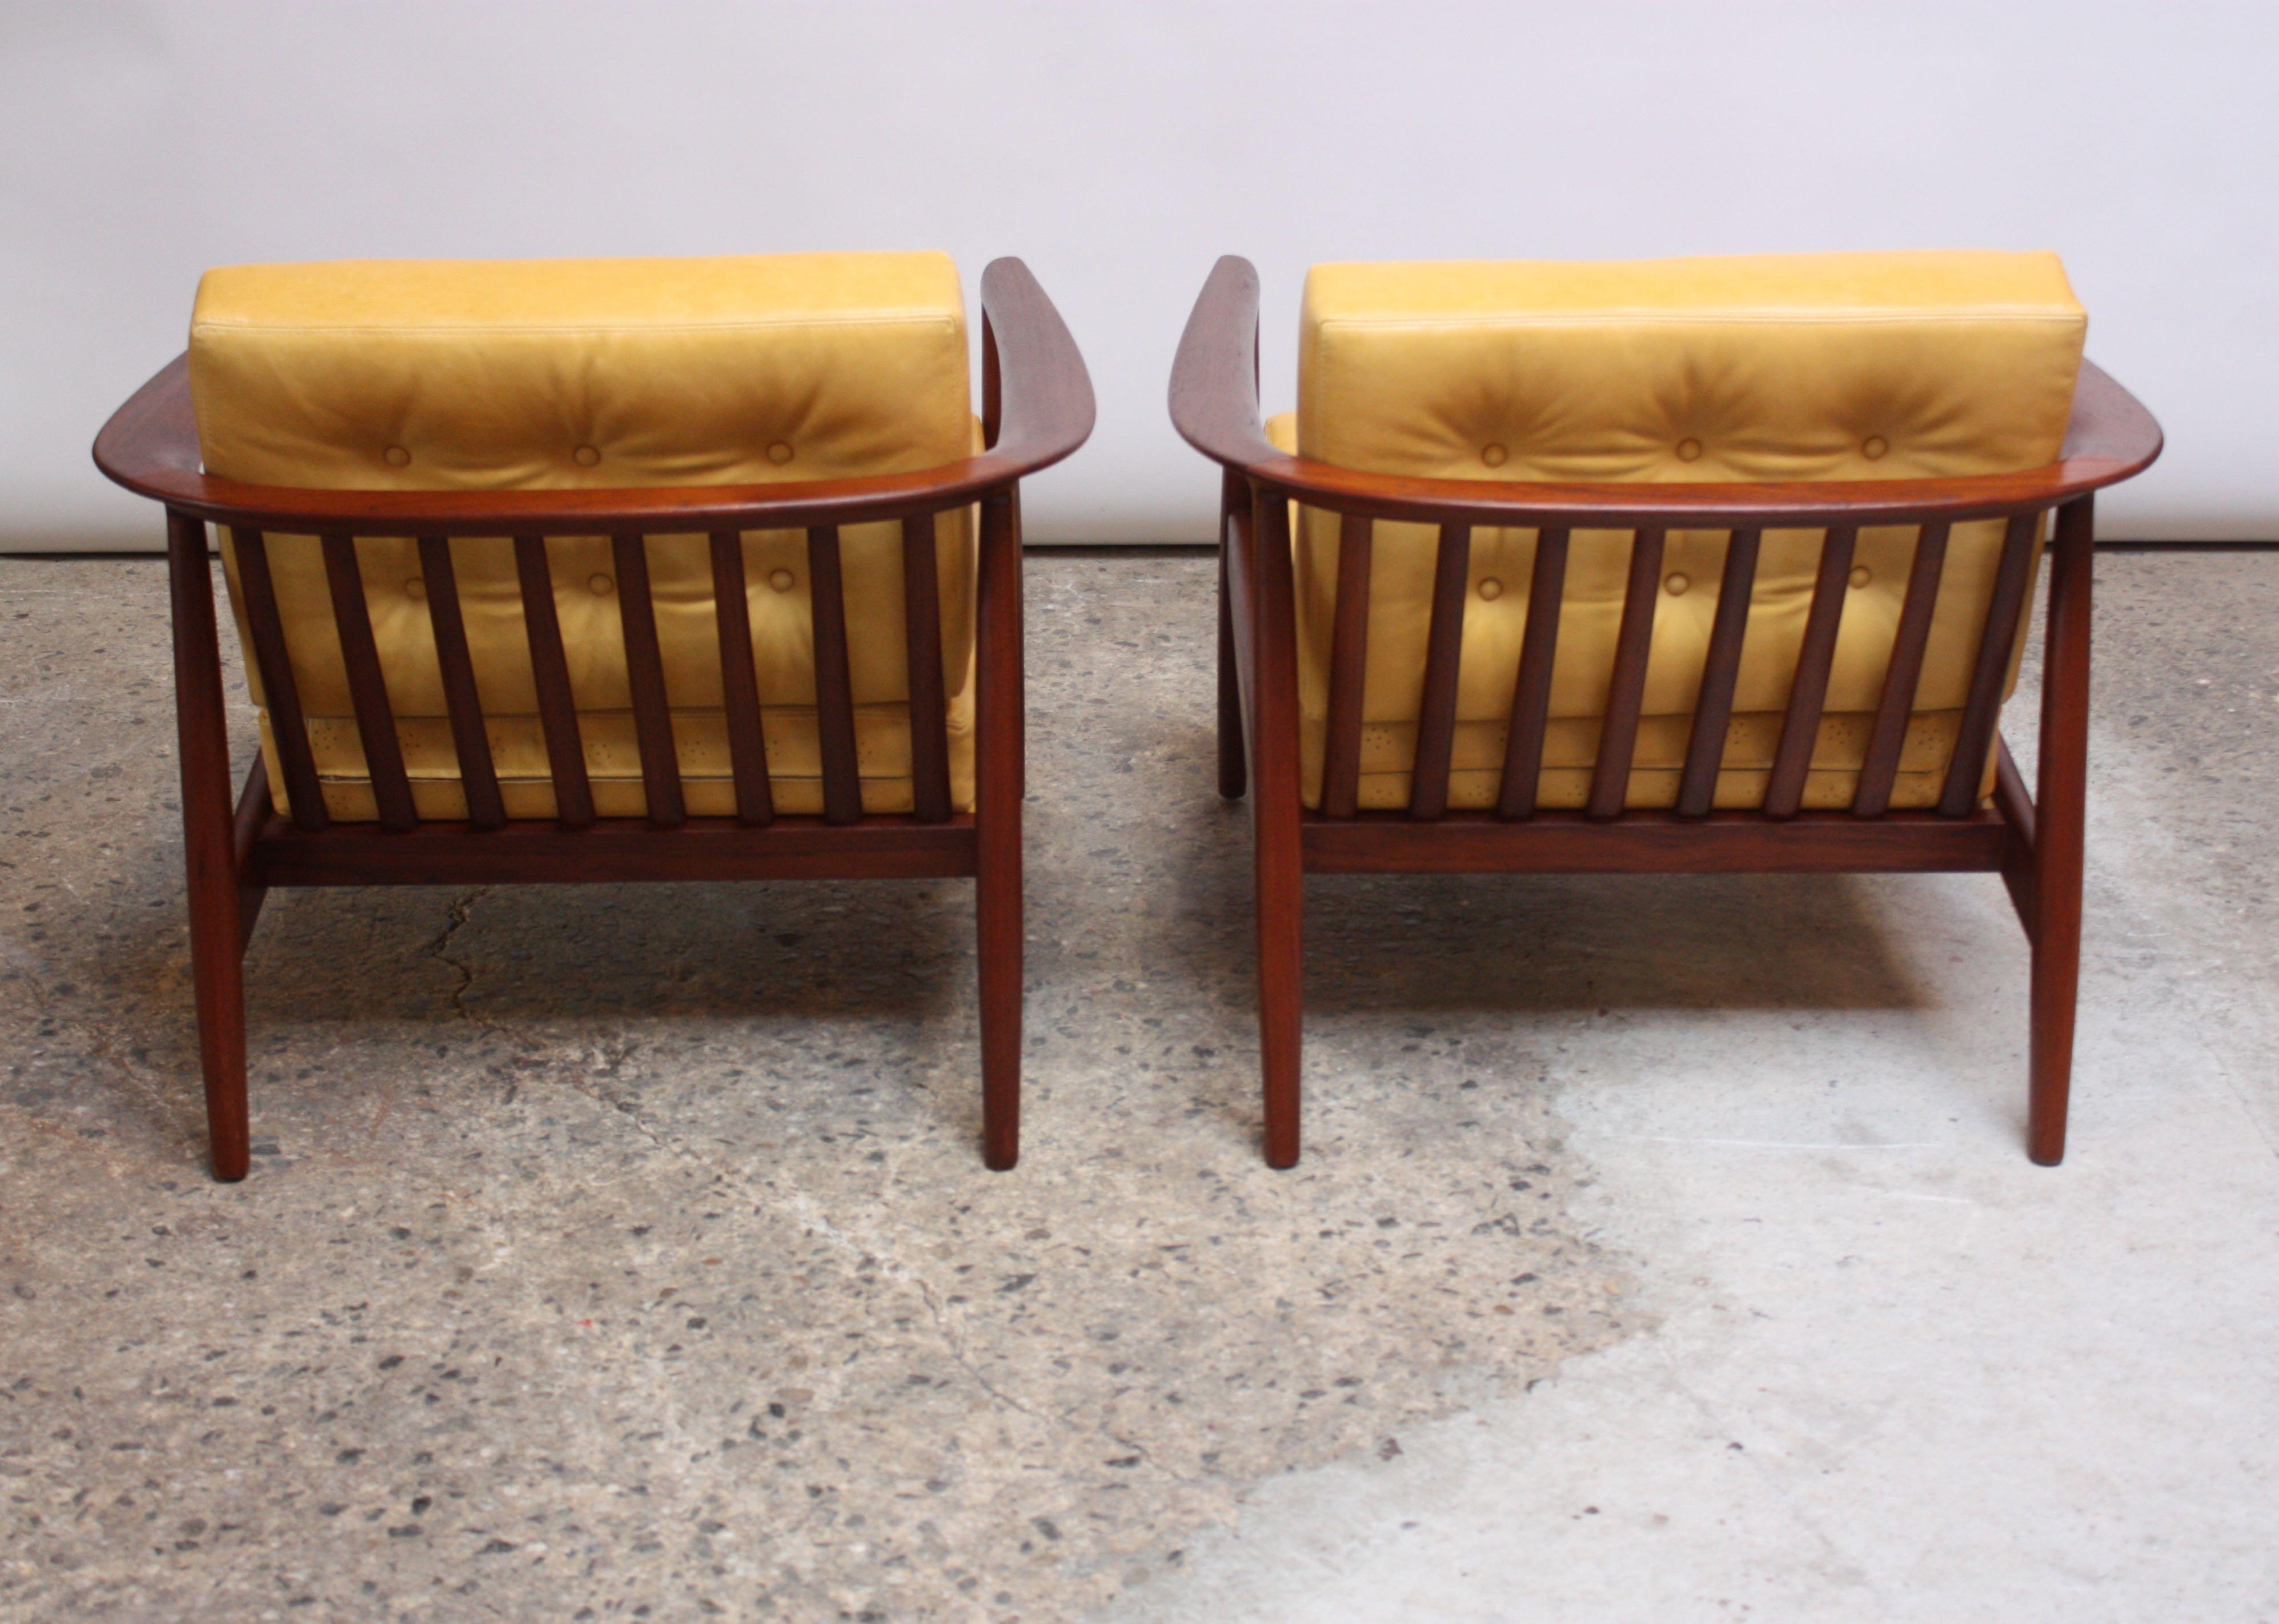 Swedish Modern Leather and Teak Lounge Chairs by Folke Ohlsson for DUX In Excellent Condition For Sale In Brooklyn, NY